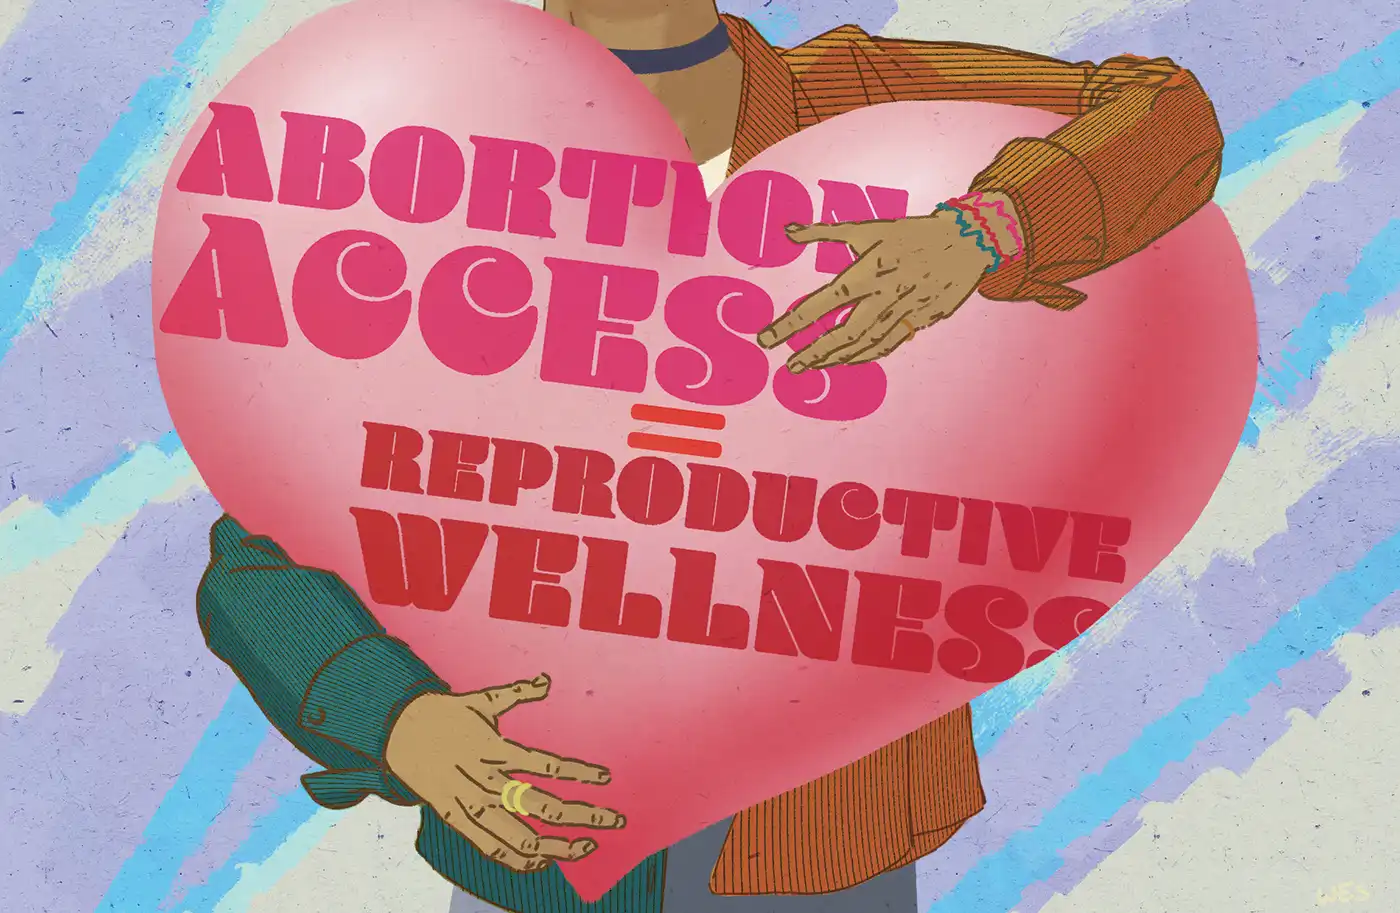 The Utah Abortion Fund supports reproductive justice by redistributing resources, sharing information and providing aid for those seeking abortion care.